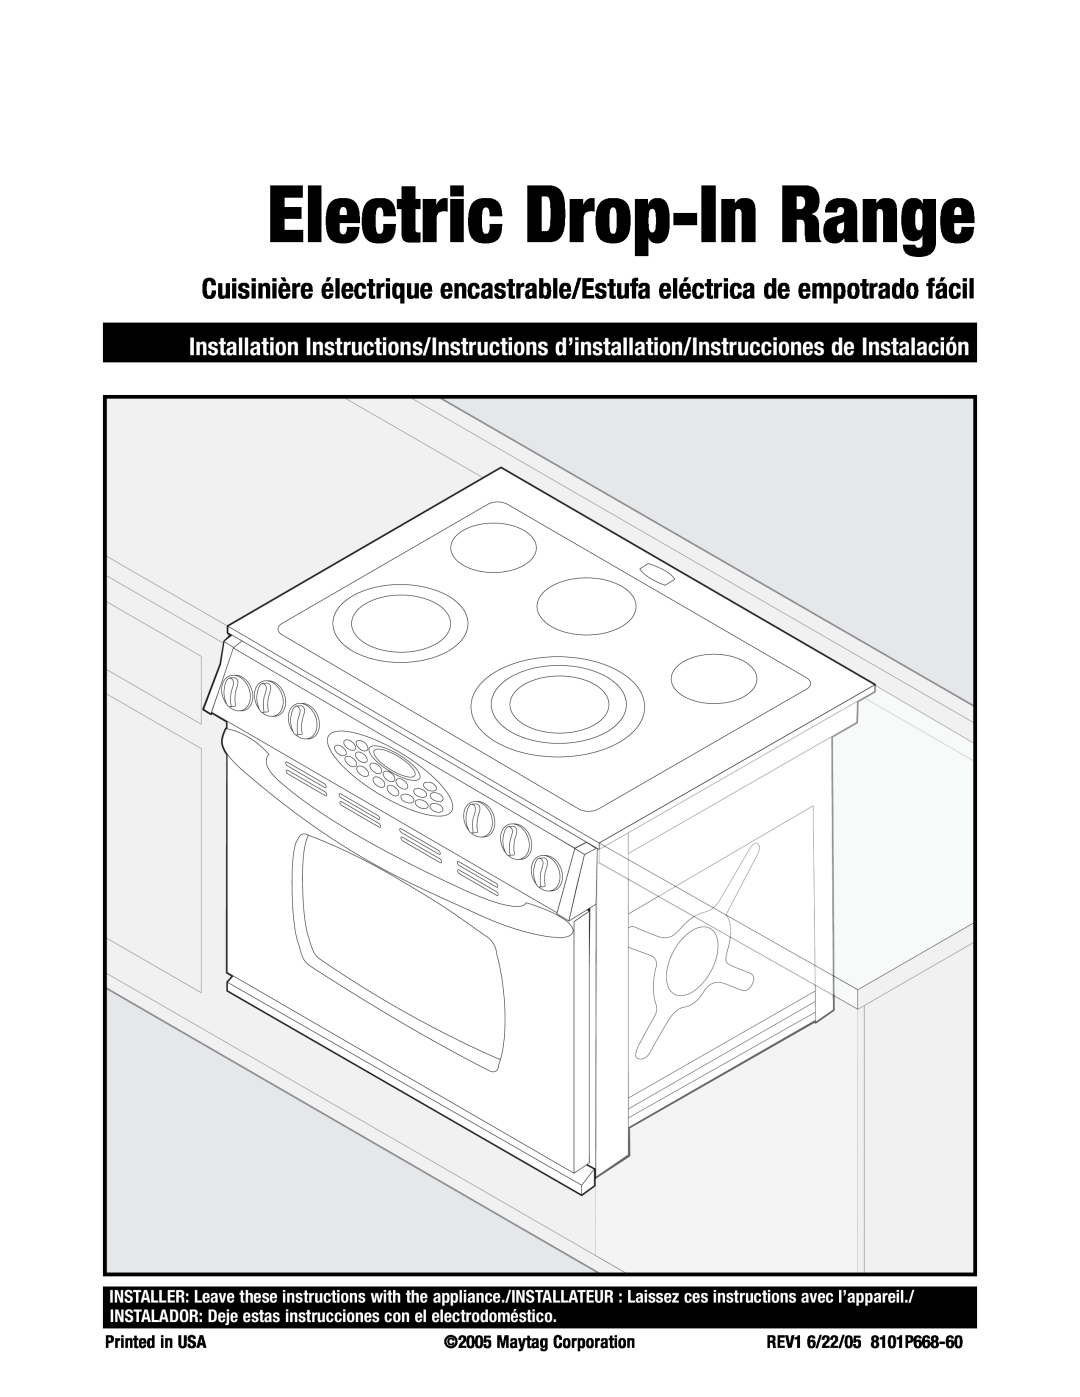 Maytag 8101P668-60 installation instructions Electric Drop-InRange, Maytag Corporation 